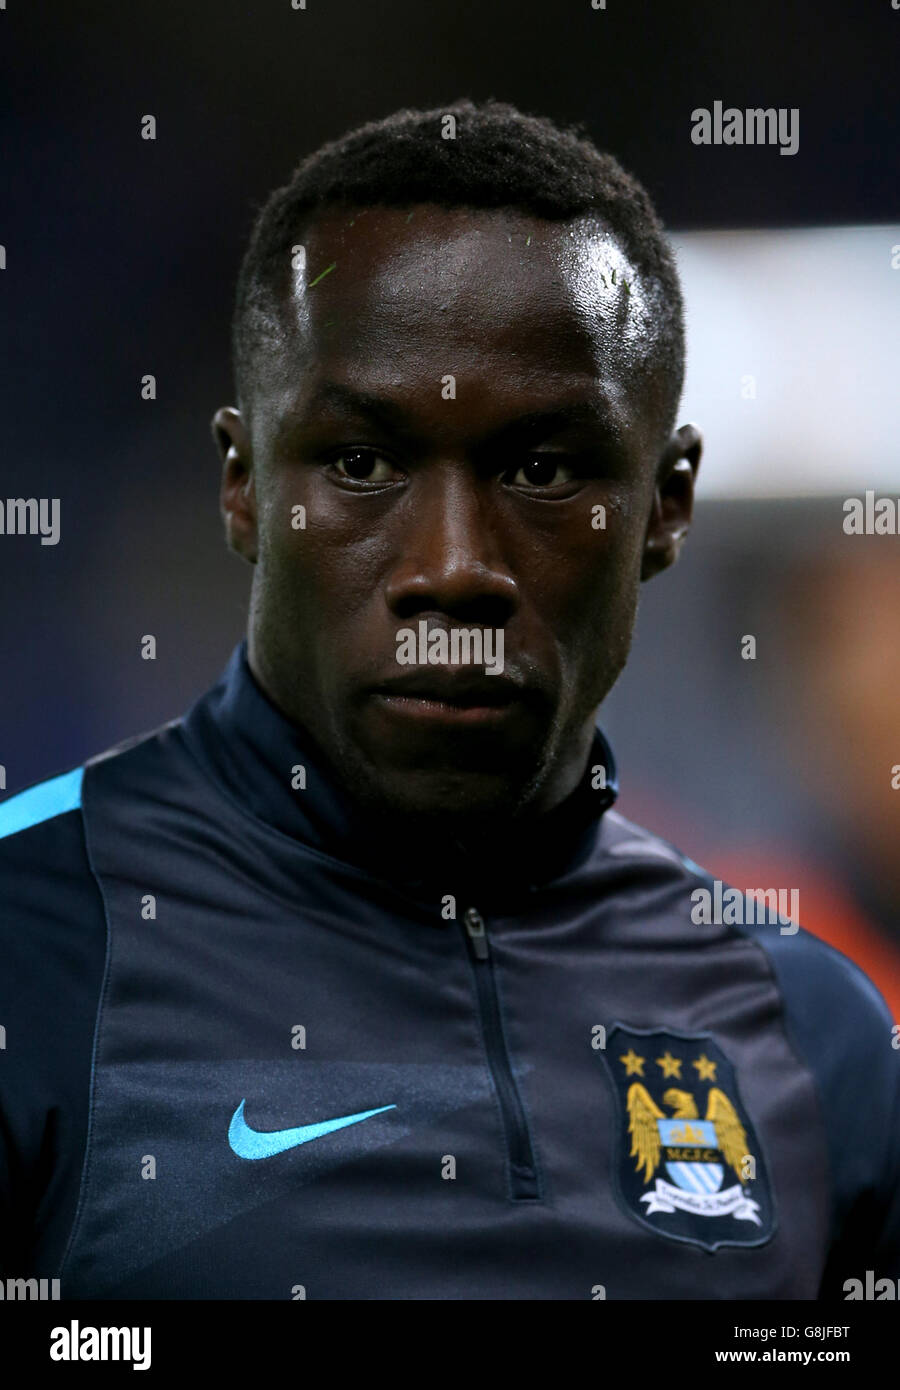 Leicester City v Manchester City - Barclays Premier League - King Power Stadium. Manchester City's Bacary Sagna Stock Photo